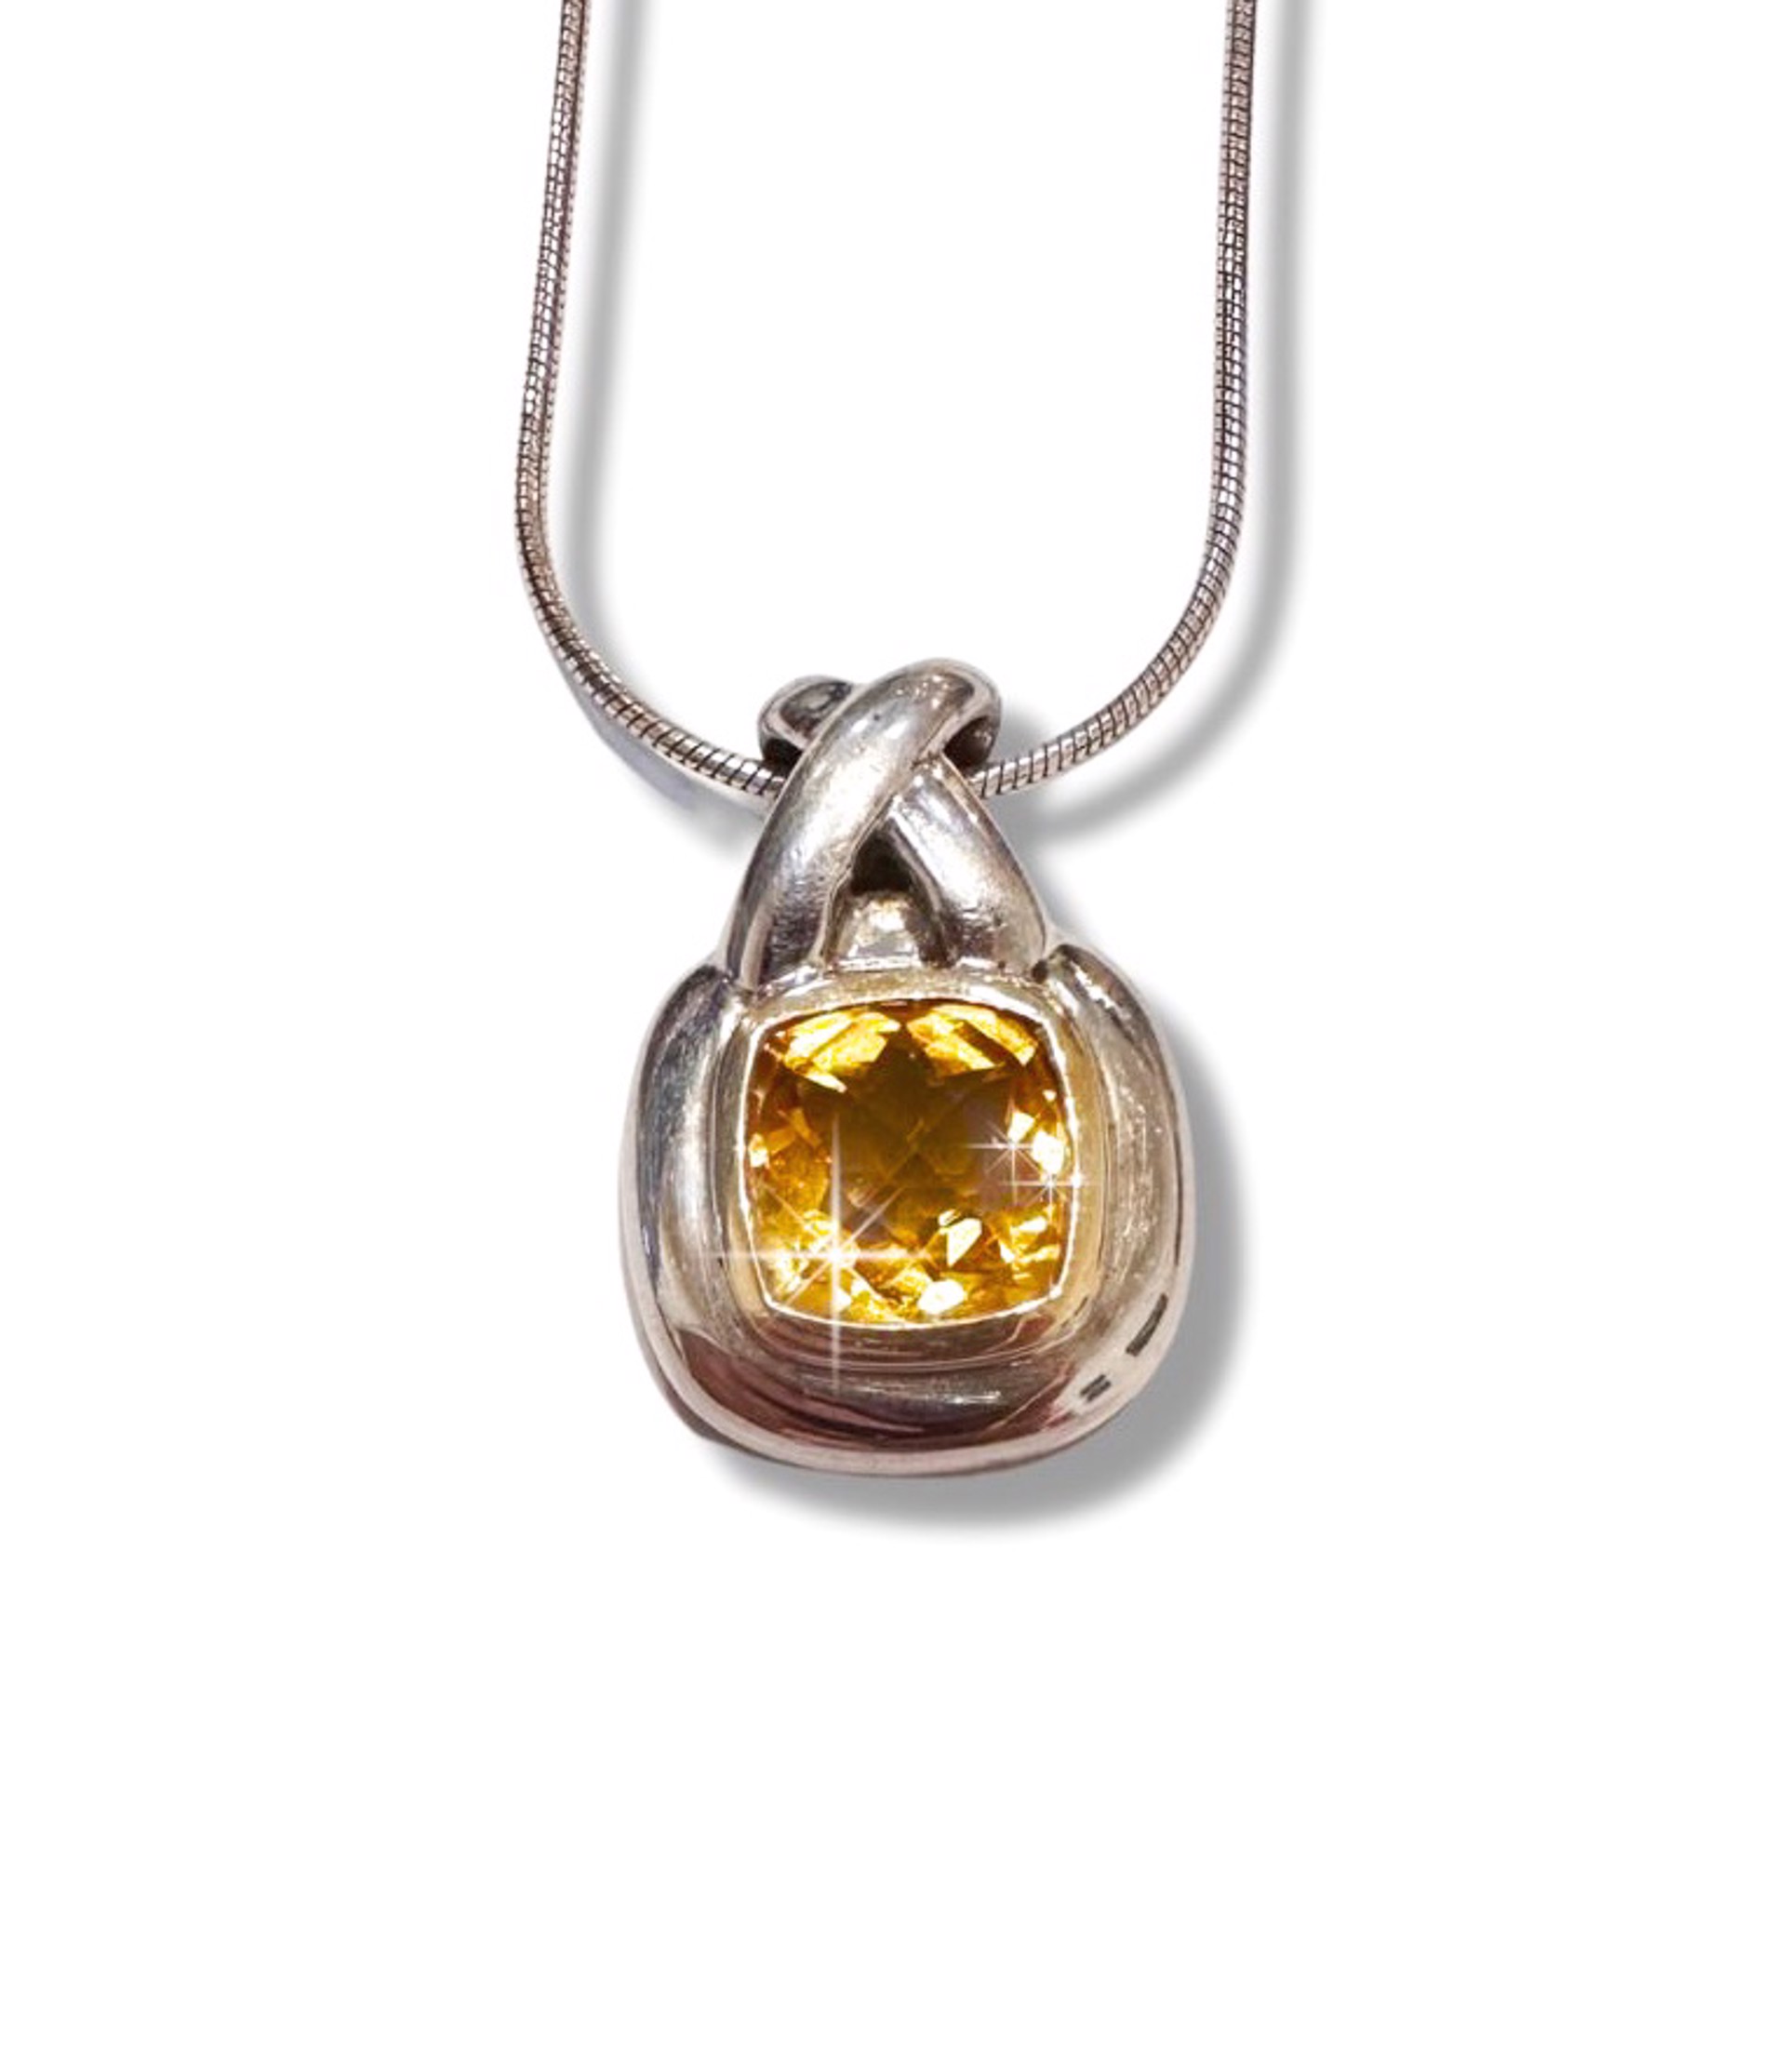 Pendant - XO Citrine in Sterling Silver with 14KT Gold Surround by Joryel Vera